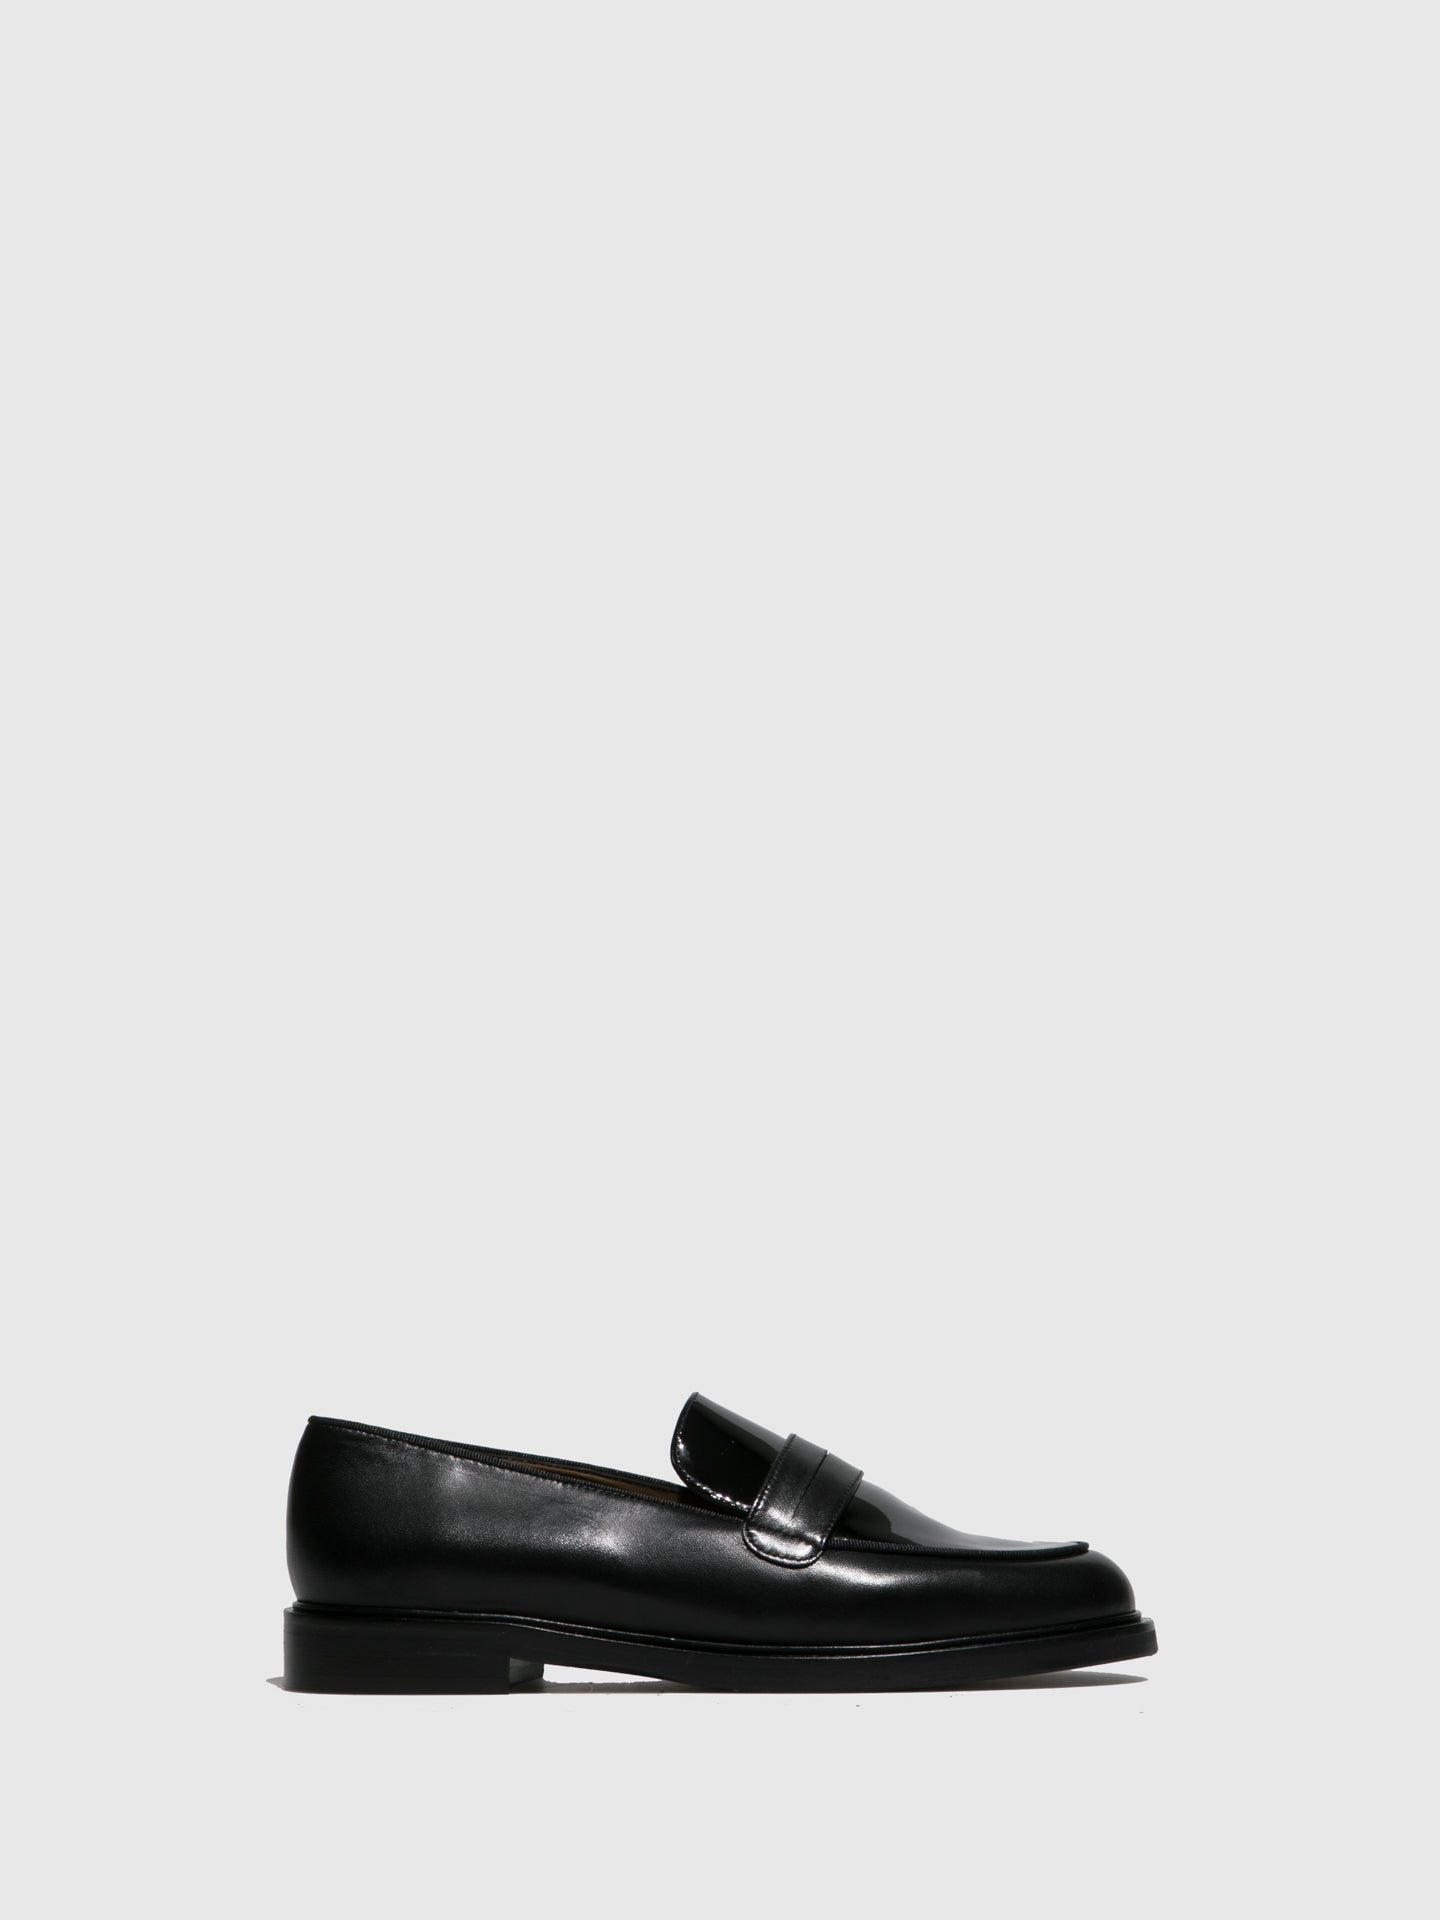 JJ Heitor Black Leather Loafers Shoes